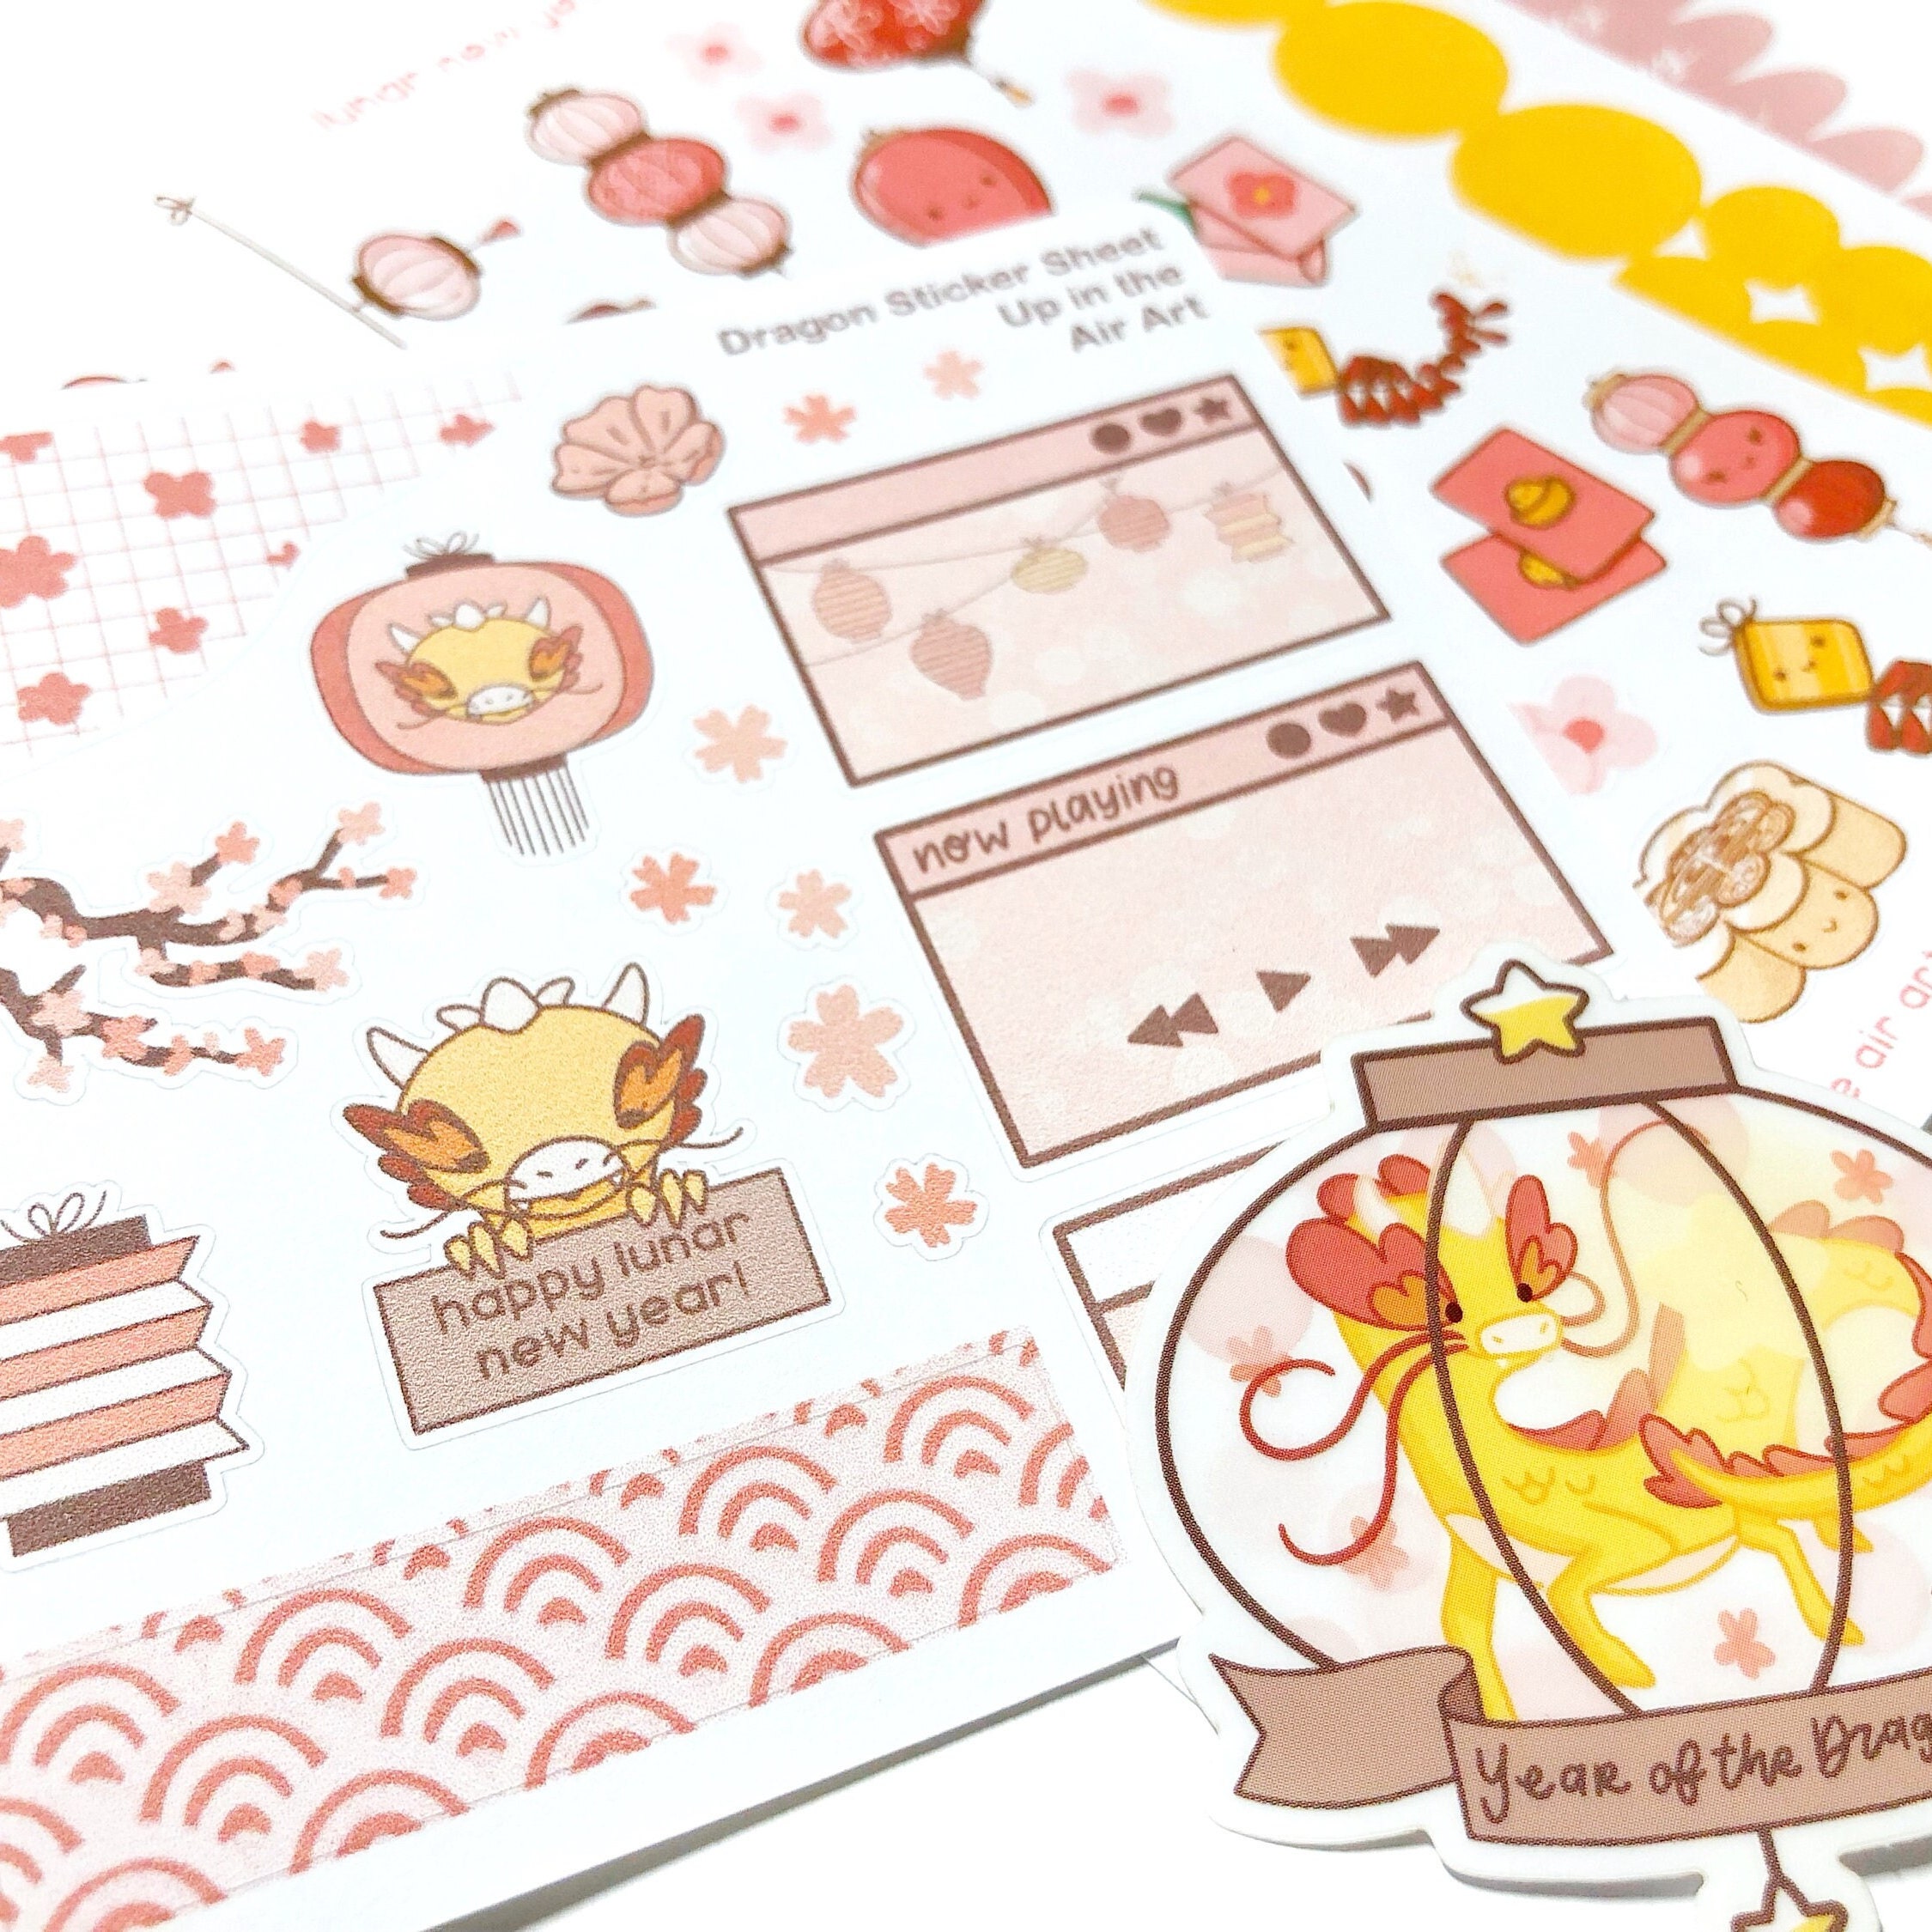 370+ Chinese New Year Stickers Drawing Stock Illustrations